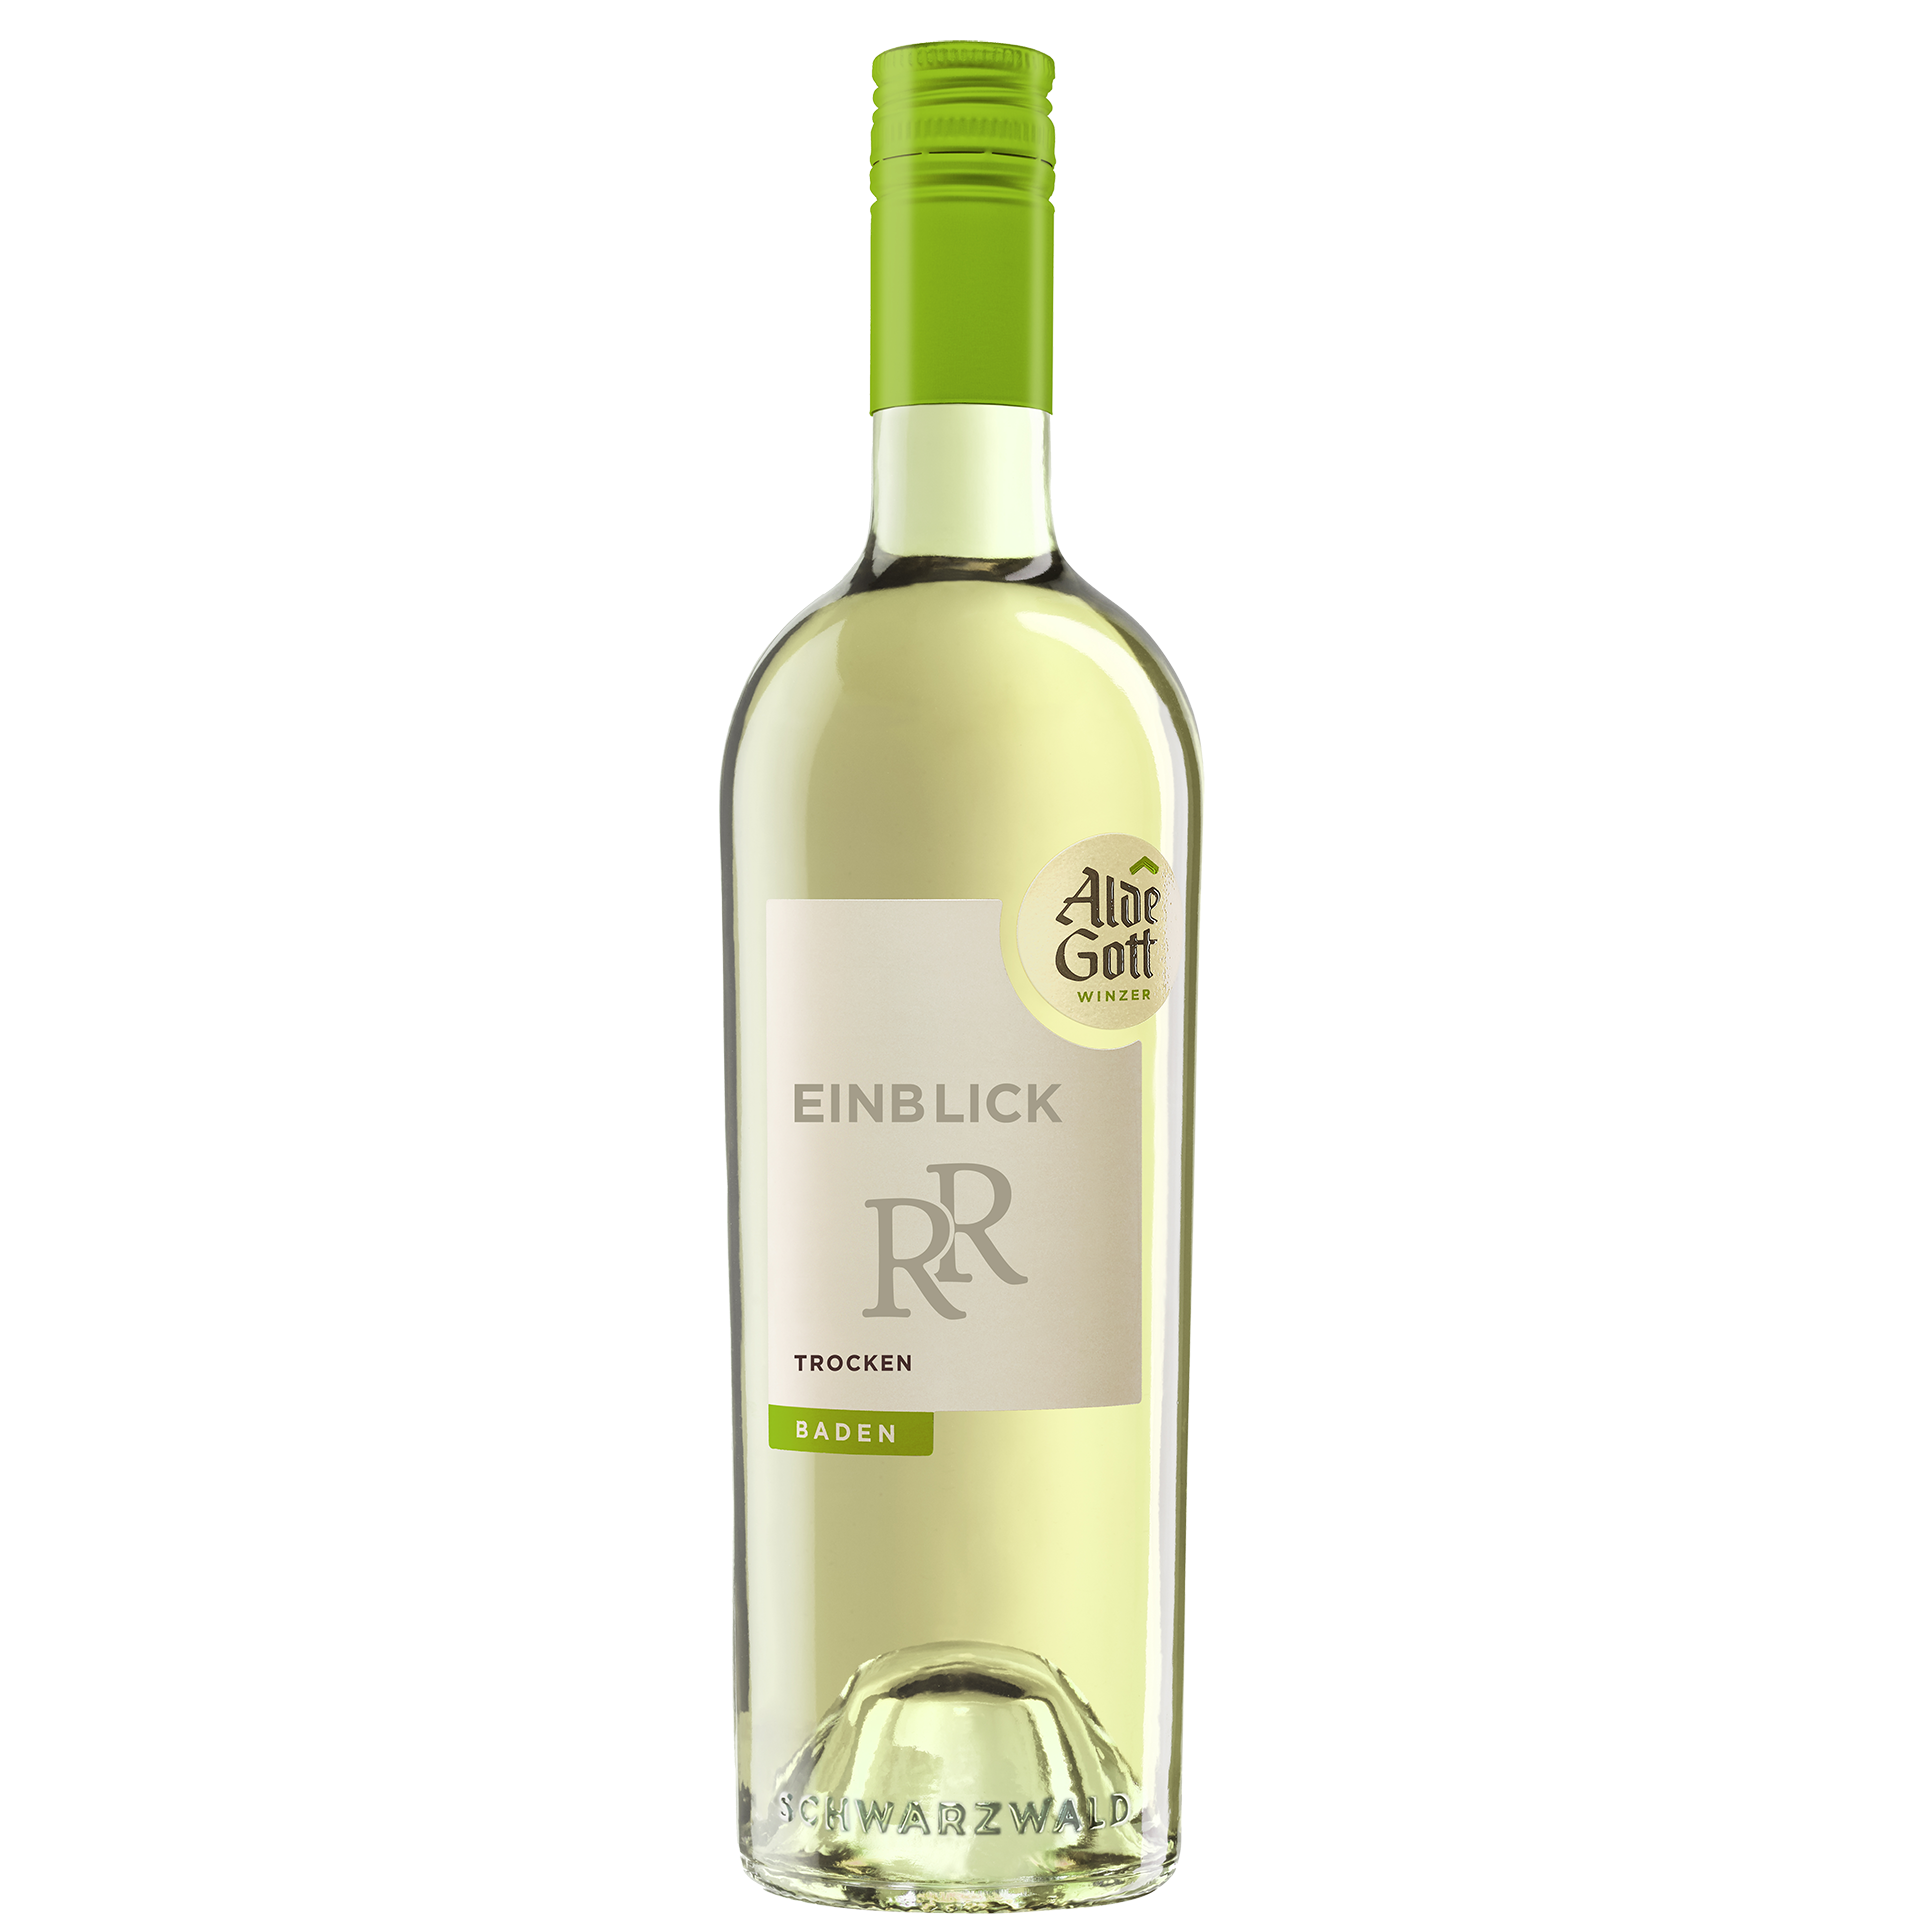 "RR" Rivaner & Riesling